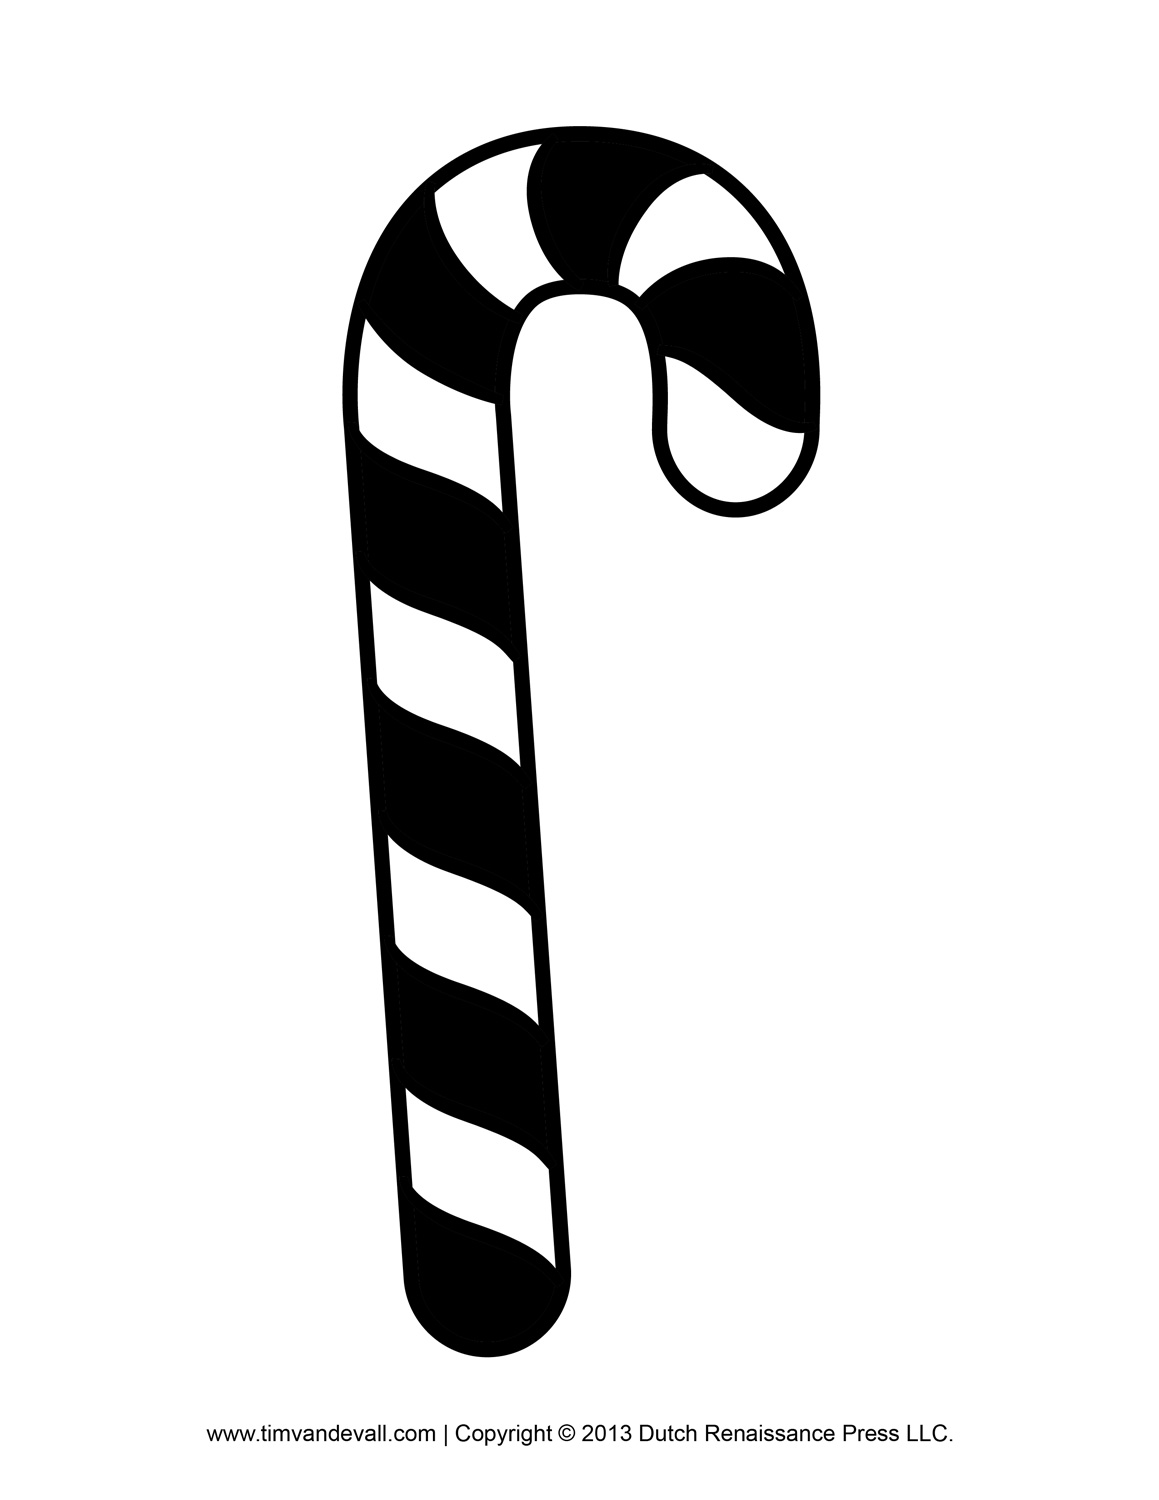 Candy Cane Black and White